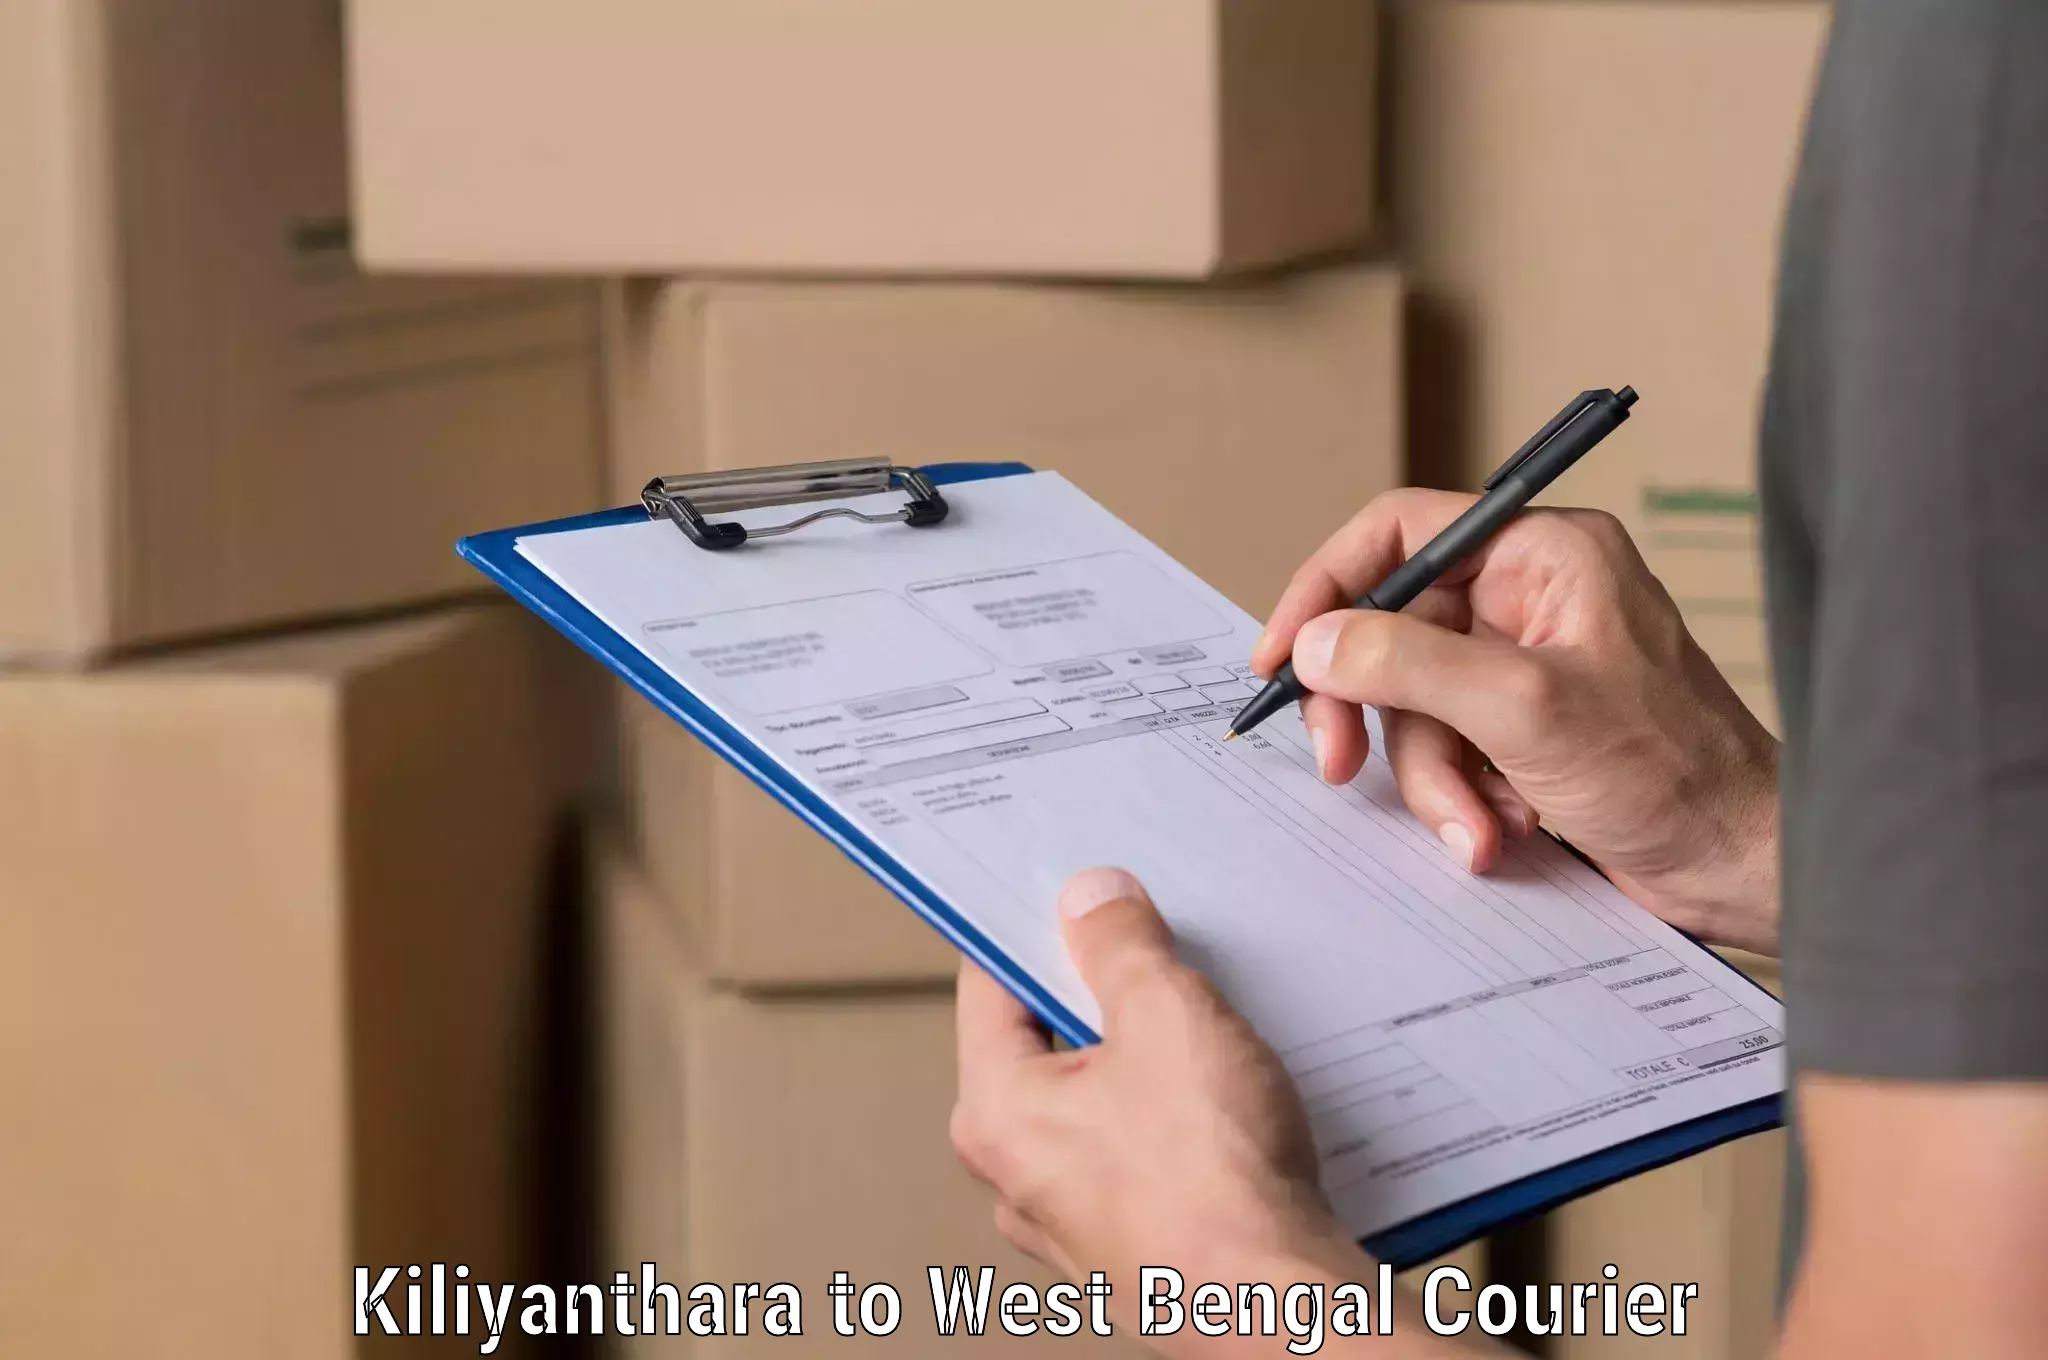 User-friendly delivery service Kiliyanthara to West Bengal